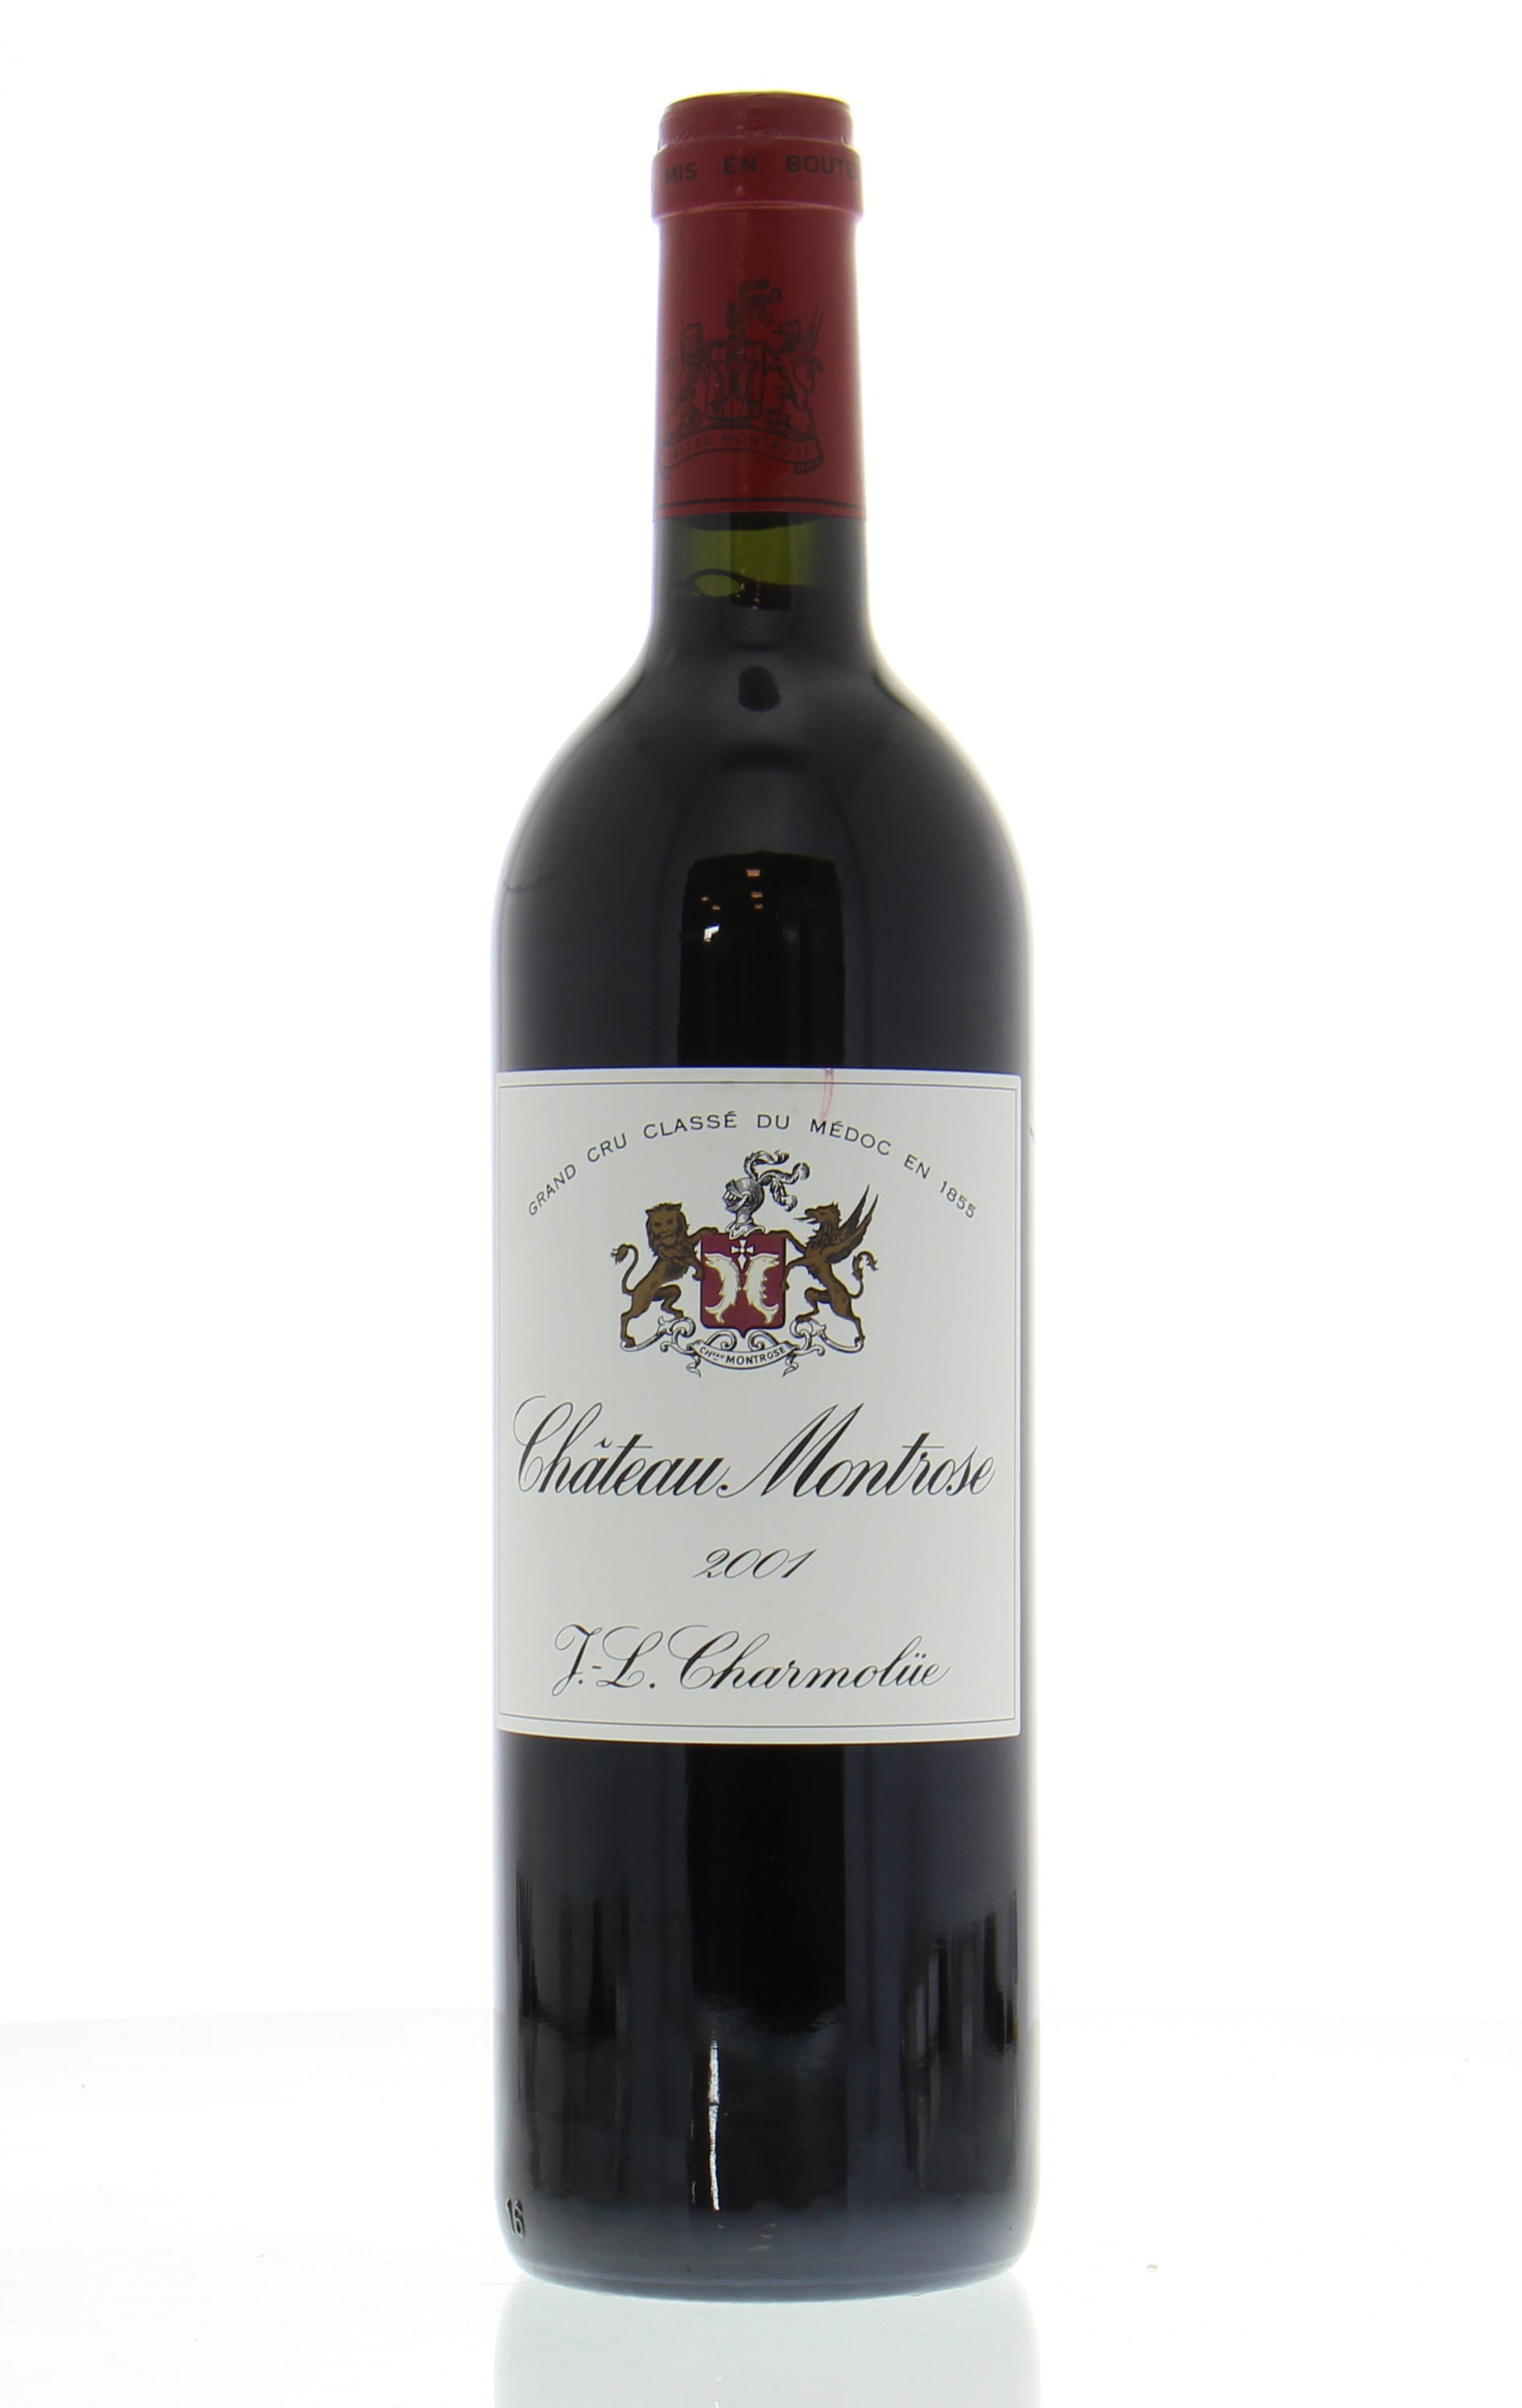 Chateau Montrose - Chateau Montrose 2001 From Original Wooden Case